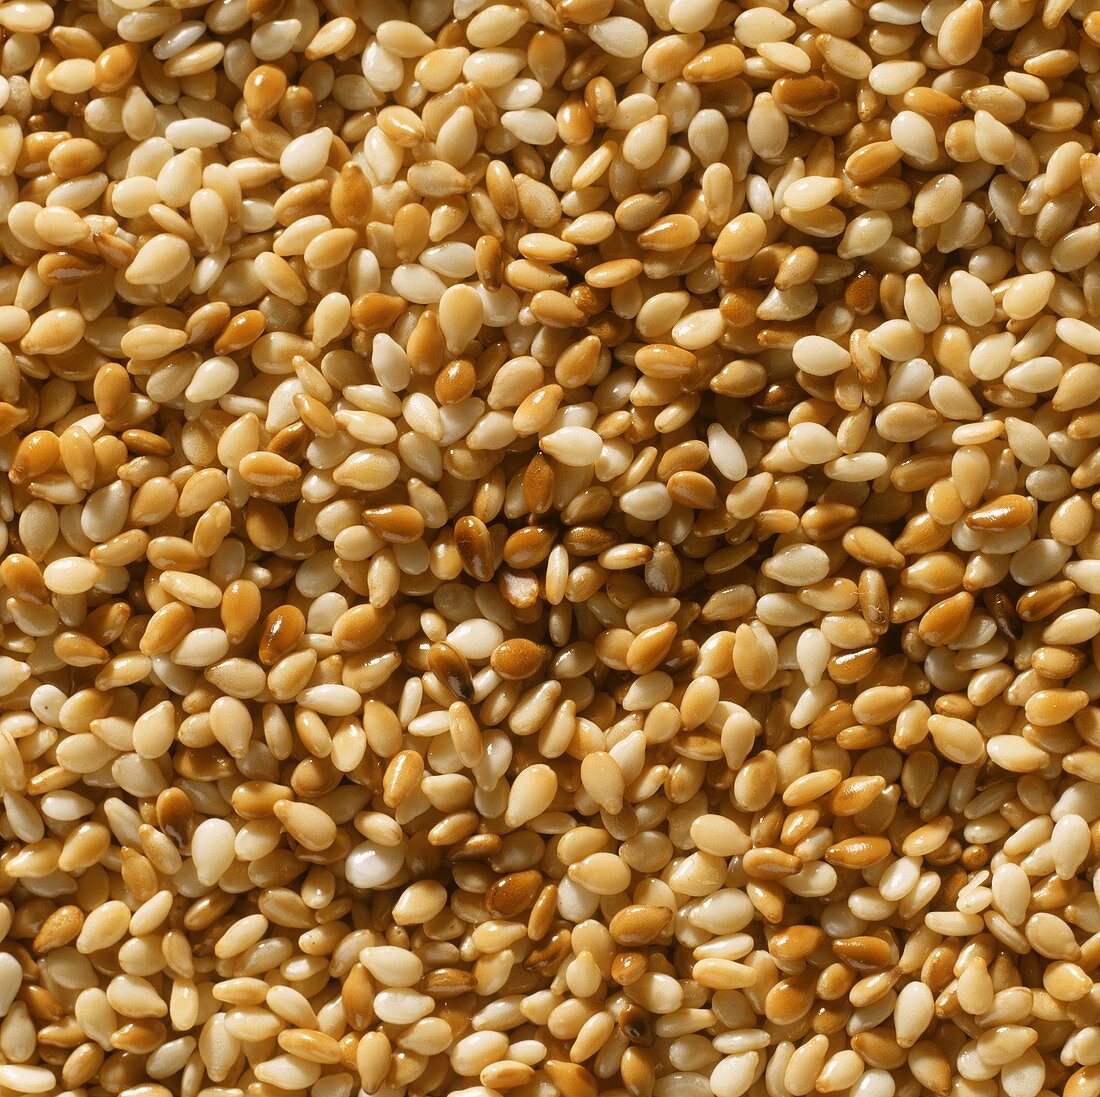 Roasted sesame (filling the picture)